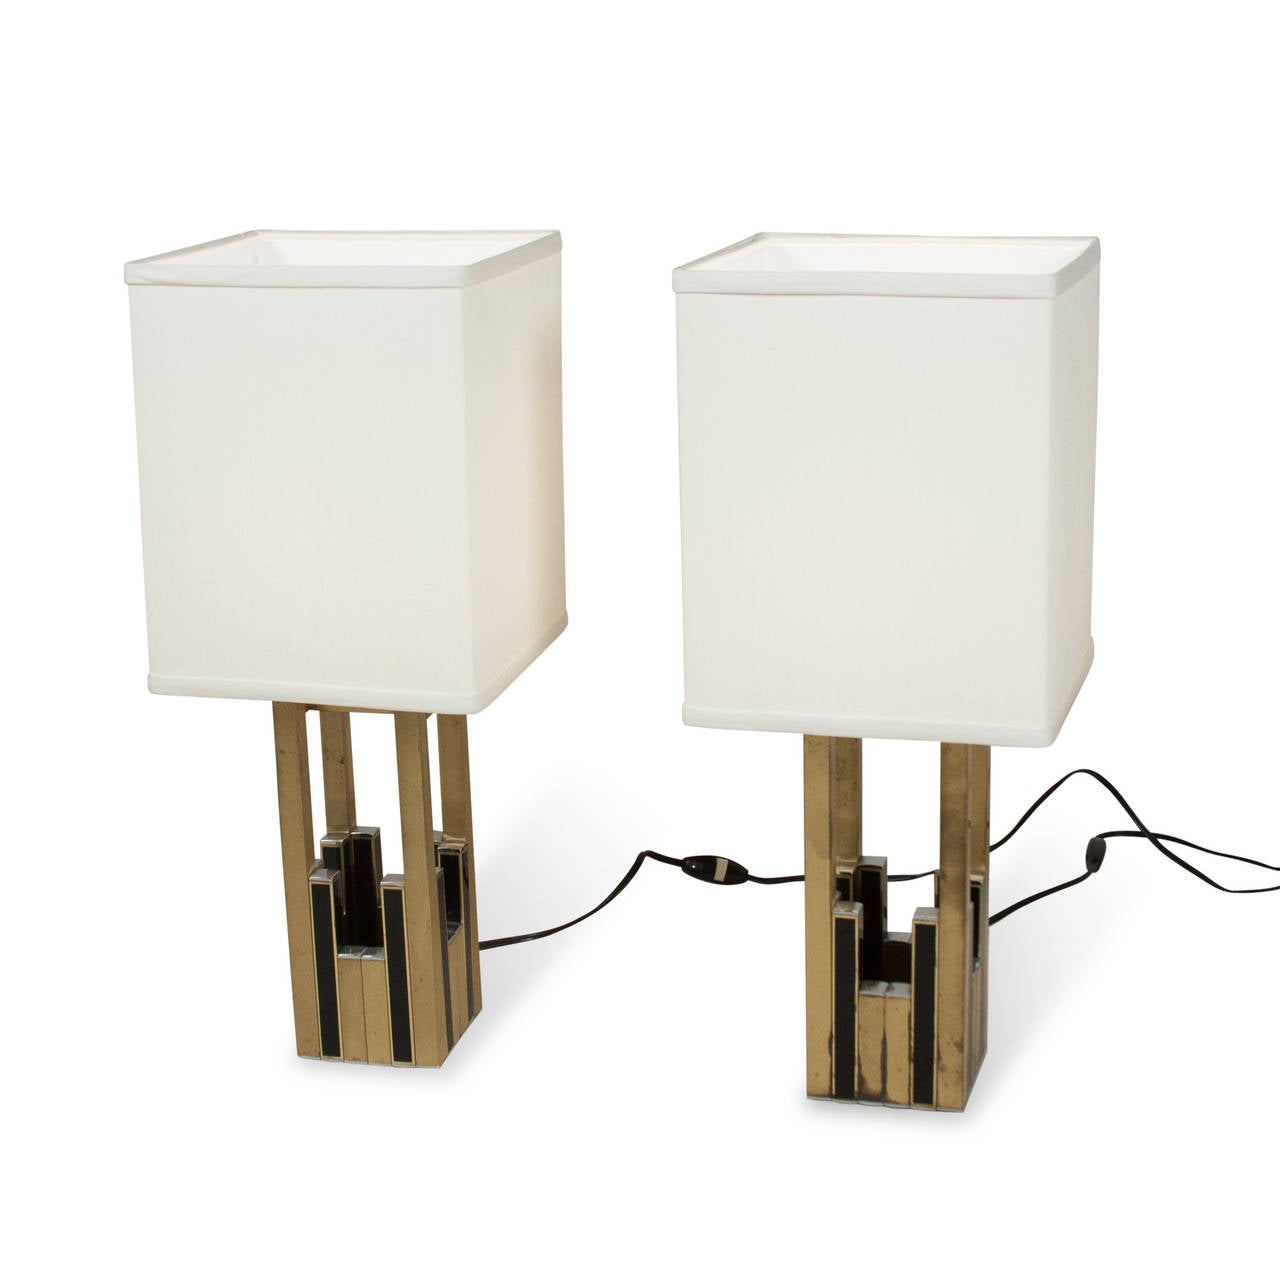 Brass and black lacquered brass table lamps, open rectangular column form with alternating black and brass elements, by Lumica, Italian, 1970s. Overall height 20 1/2 in, height of base to top of metal 10 in, base measures 3 3/4 in square. Shade